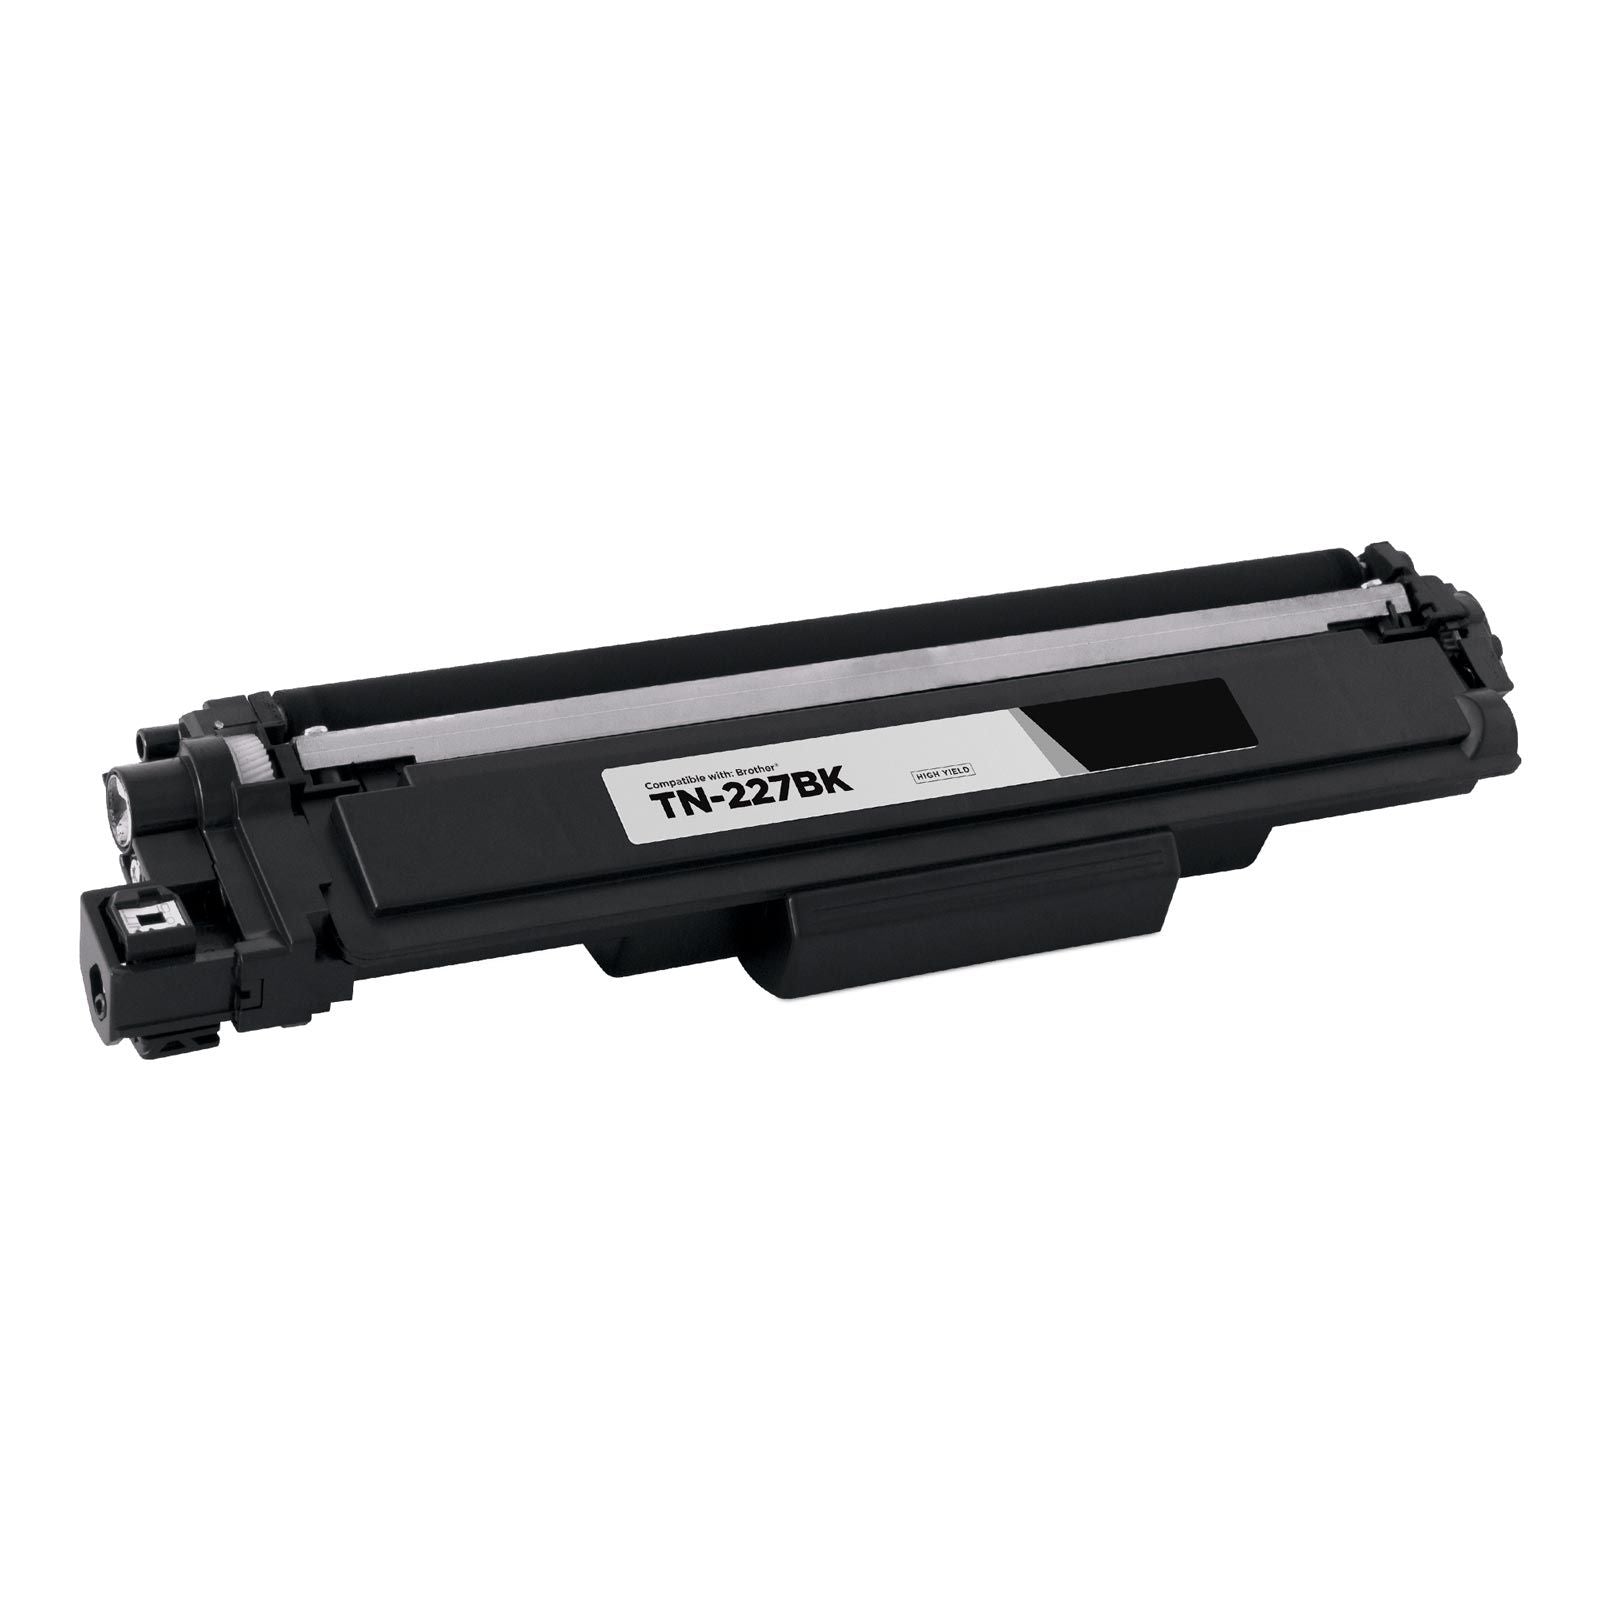 TN227BK with new chip IMPERIAL BRAND BROTHER TN227 BLACK TONER 3,000 PAGES